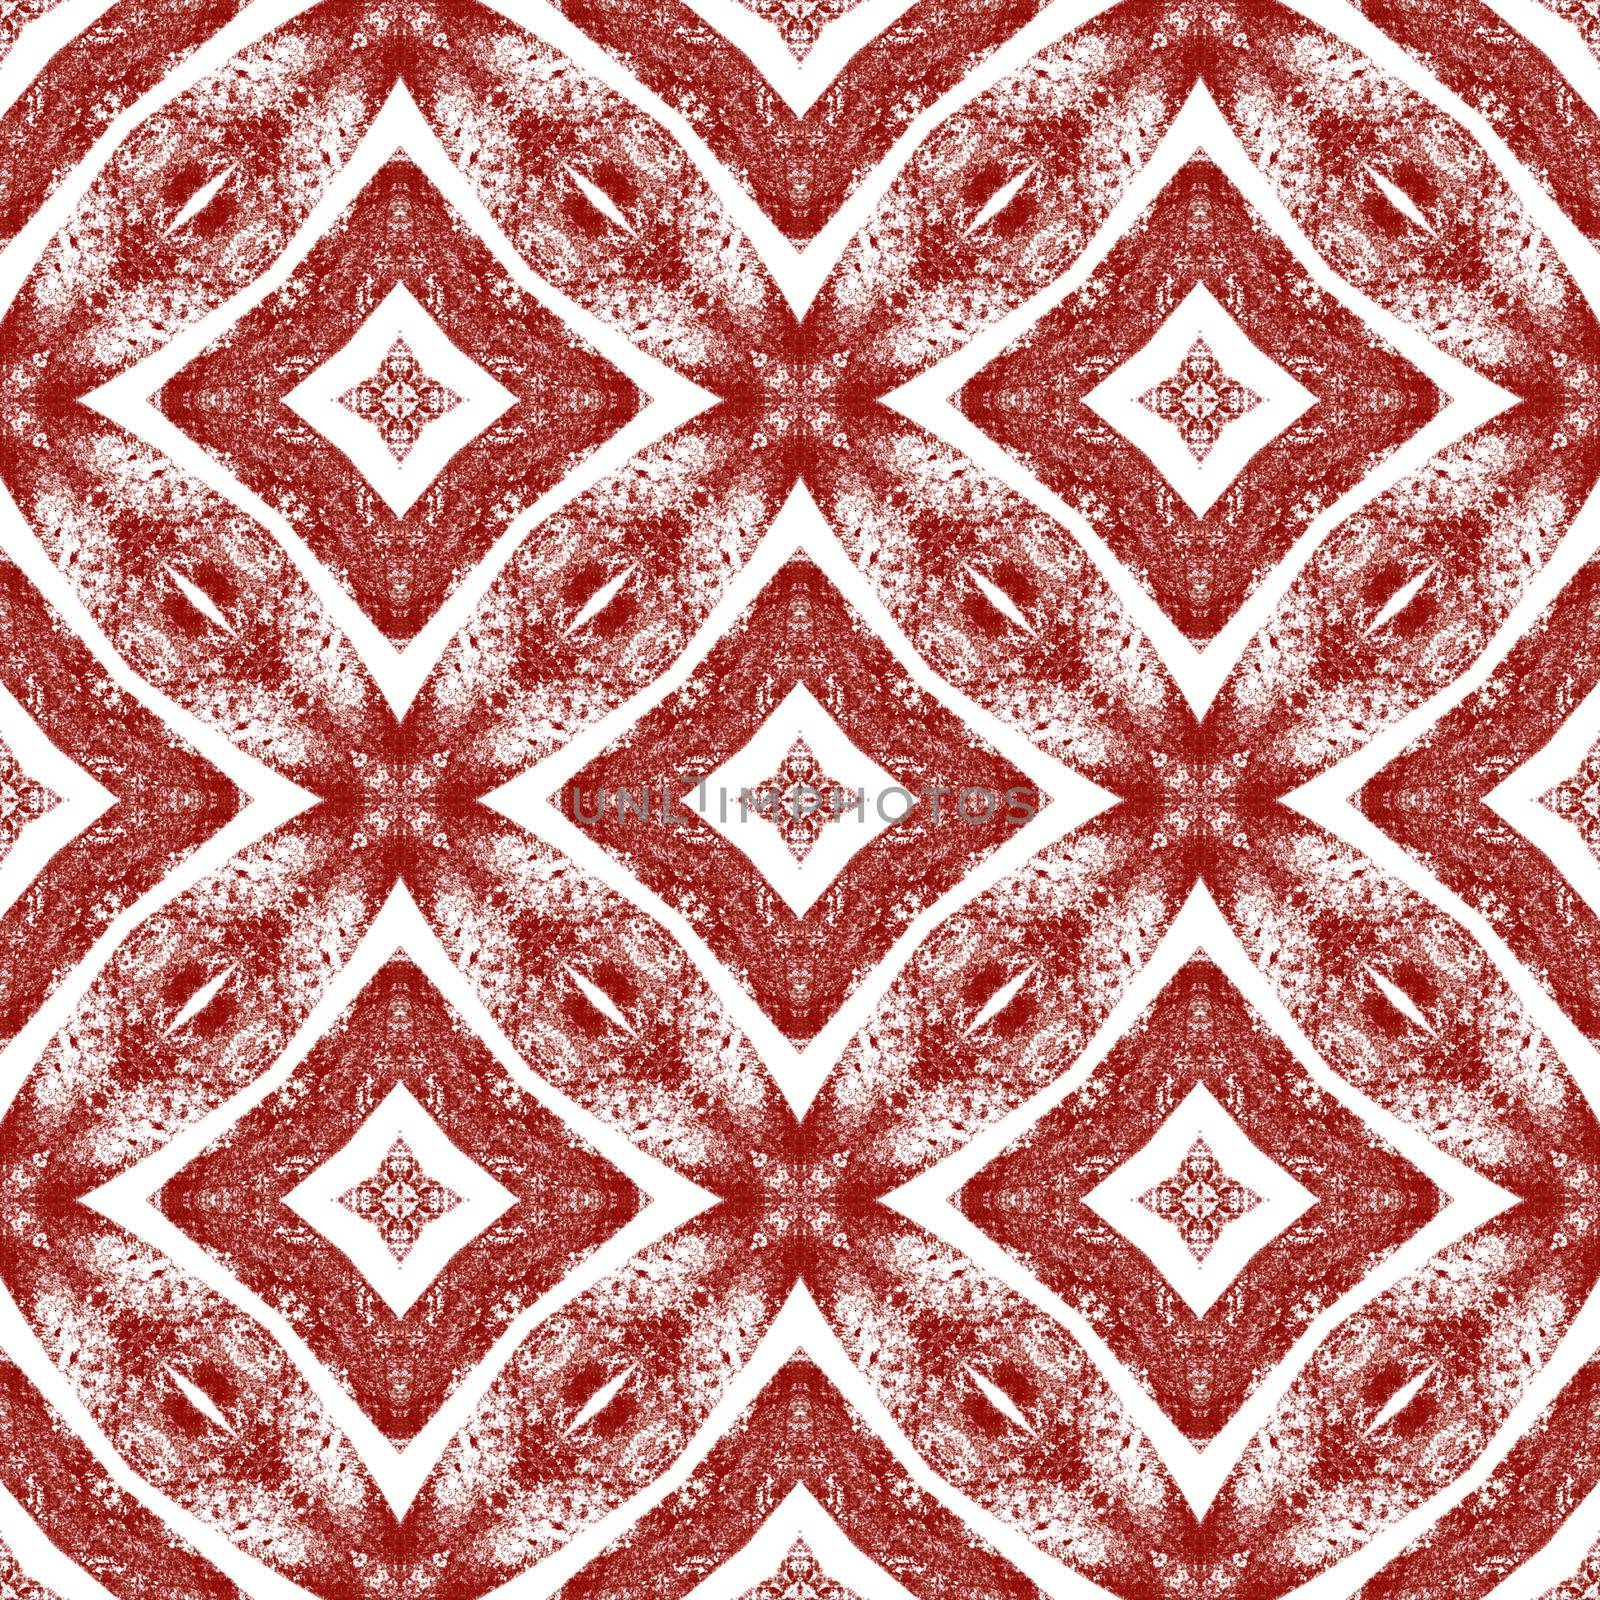 Ethnic hand painted pattern. Wine red symmetrical kaleidoscope background. Textile ready fascinating print, swimwear fabric, wallpaper, wrapping. Summer dress ethnic hand painted tile.